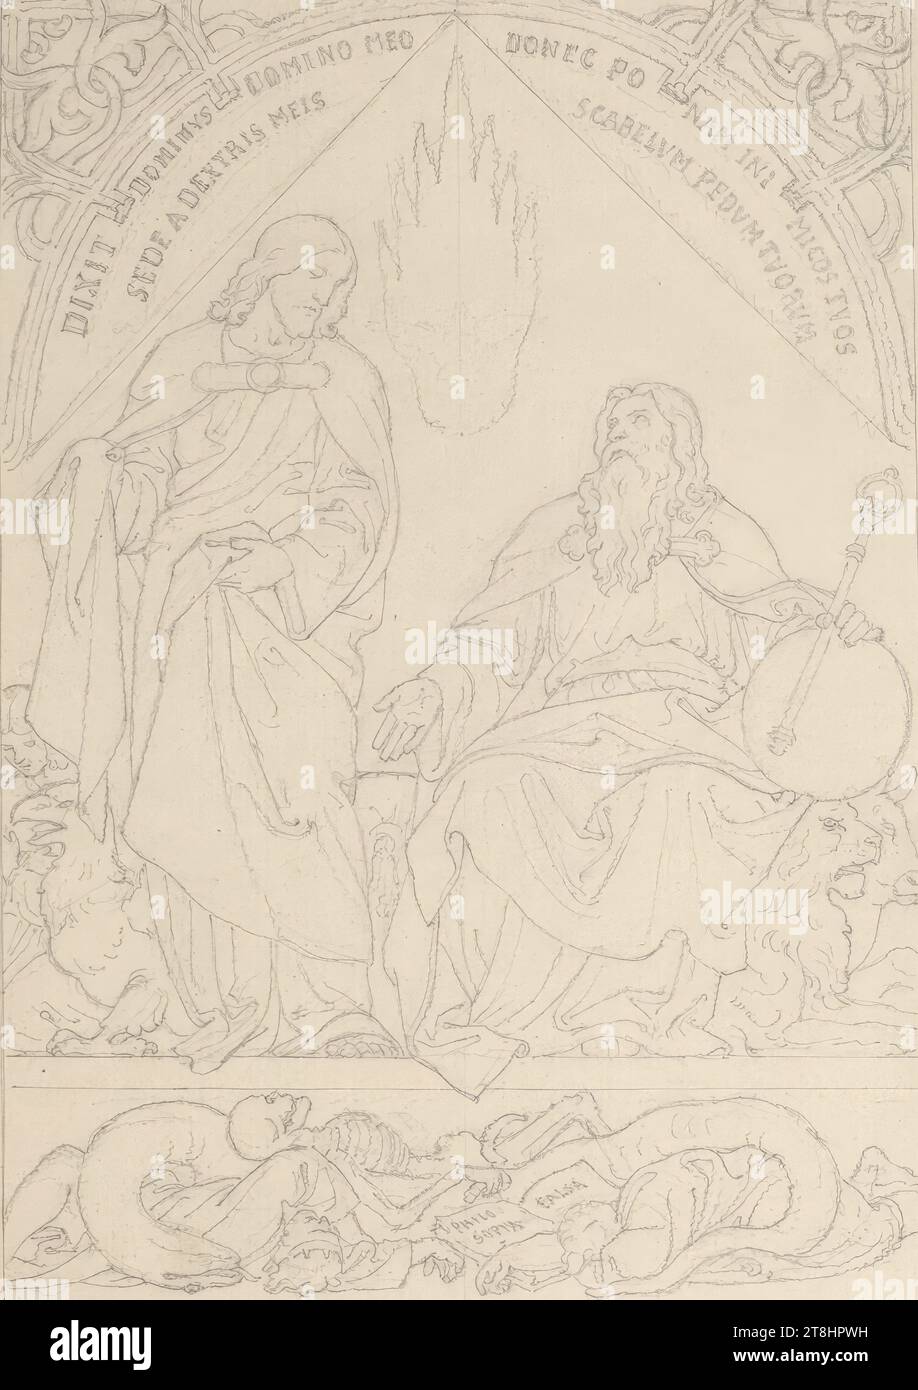 19. Psalm 108: The Holy Trinity under a sheet with writing, including the allegory of death, 30-part series: drafts for the publication 'The Psalter', Josef von Führich, Kratzau 1800 - 1876 Vienna, drawing, pencil, according to . Cahier: Passepartout: 20 x 14 cm, M.o. 'DIXIT DOMINUS DOMINO ', detailed caption, M.u. 'PHILO FALSA / SOPIA / 19, Austria Stock Photo